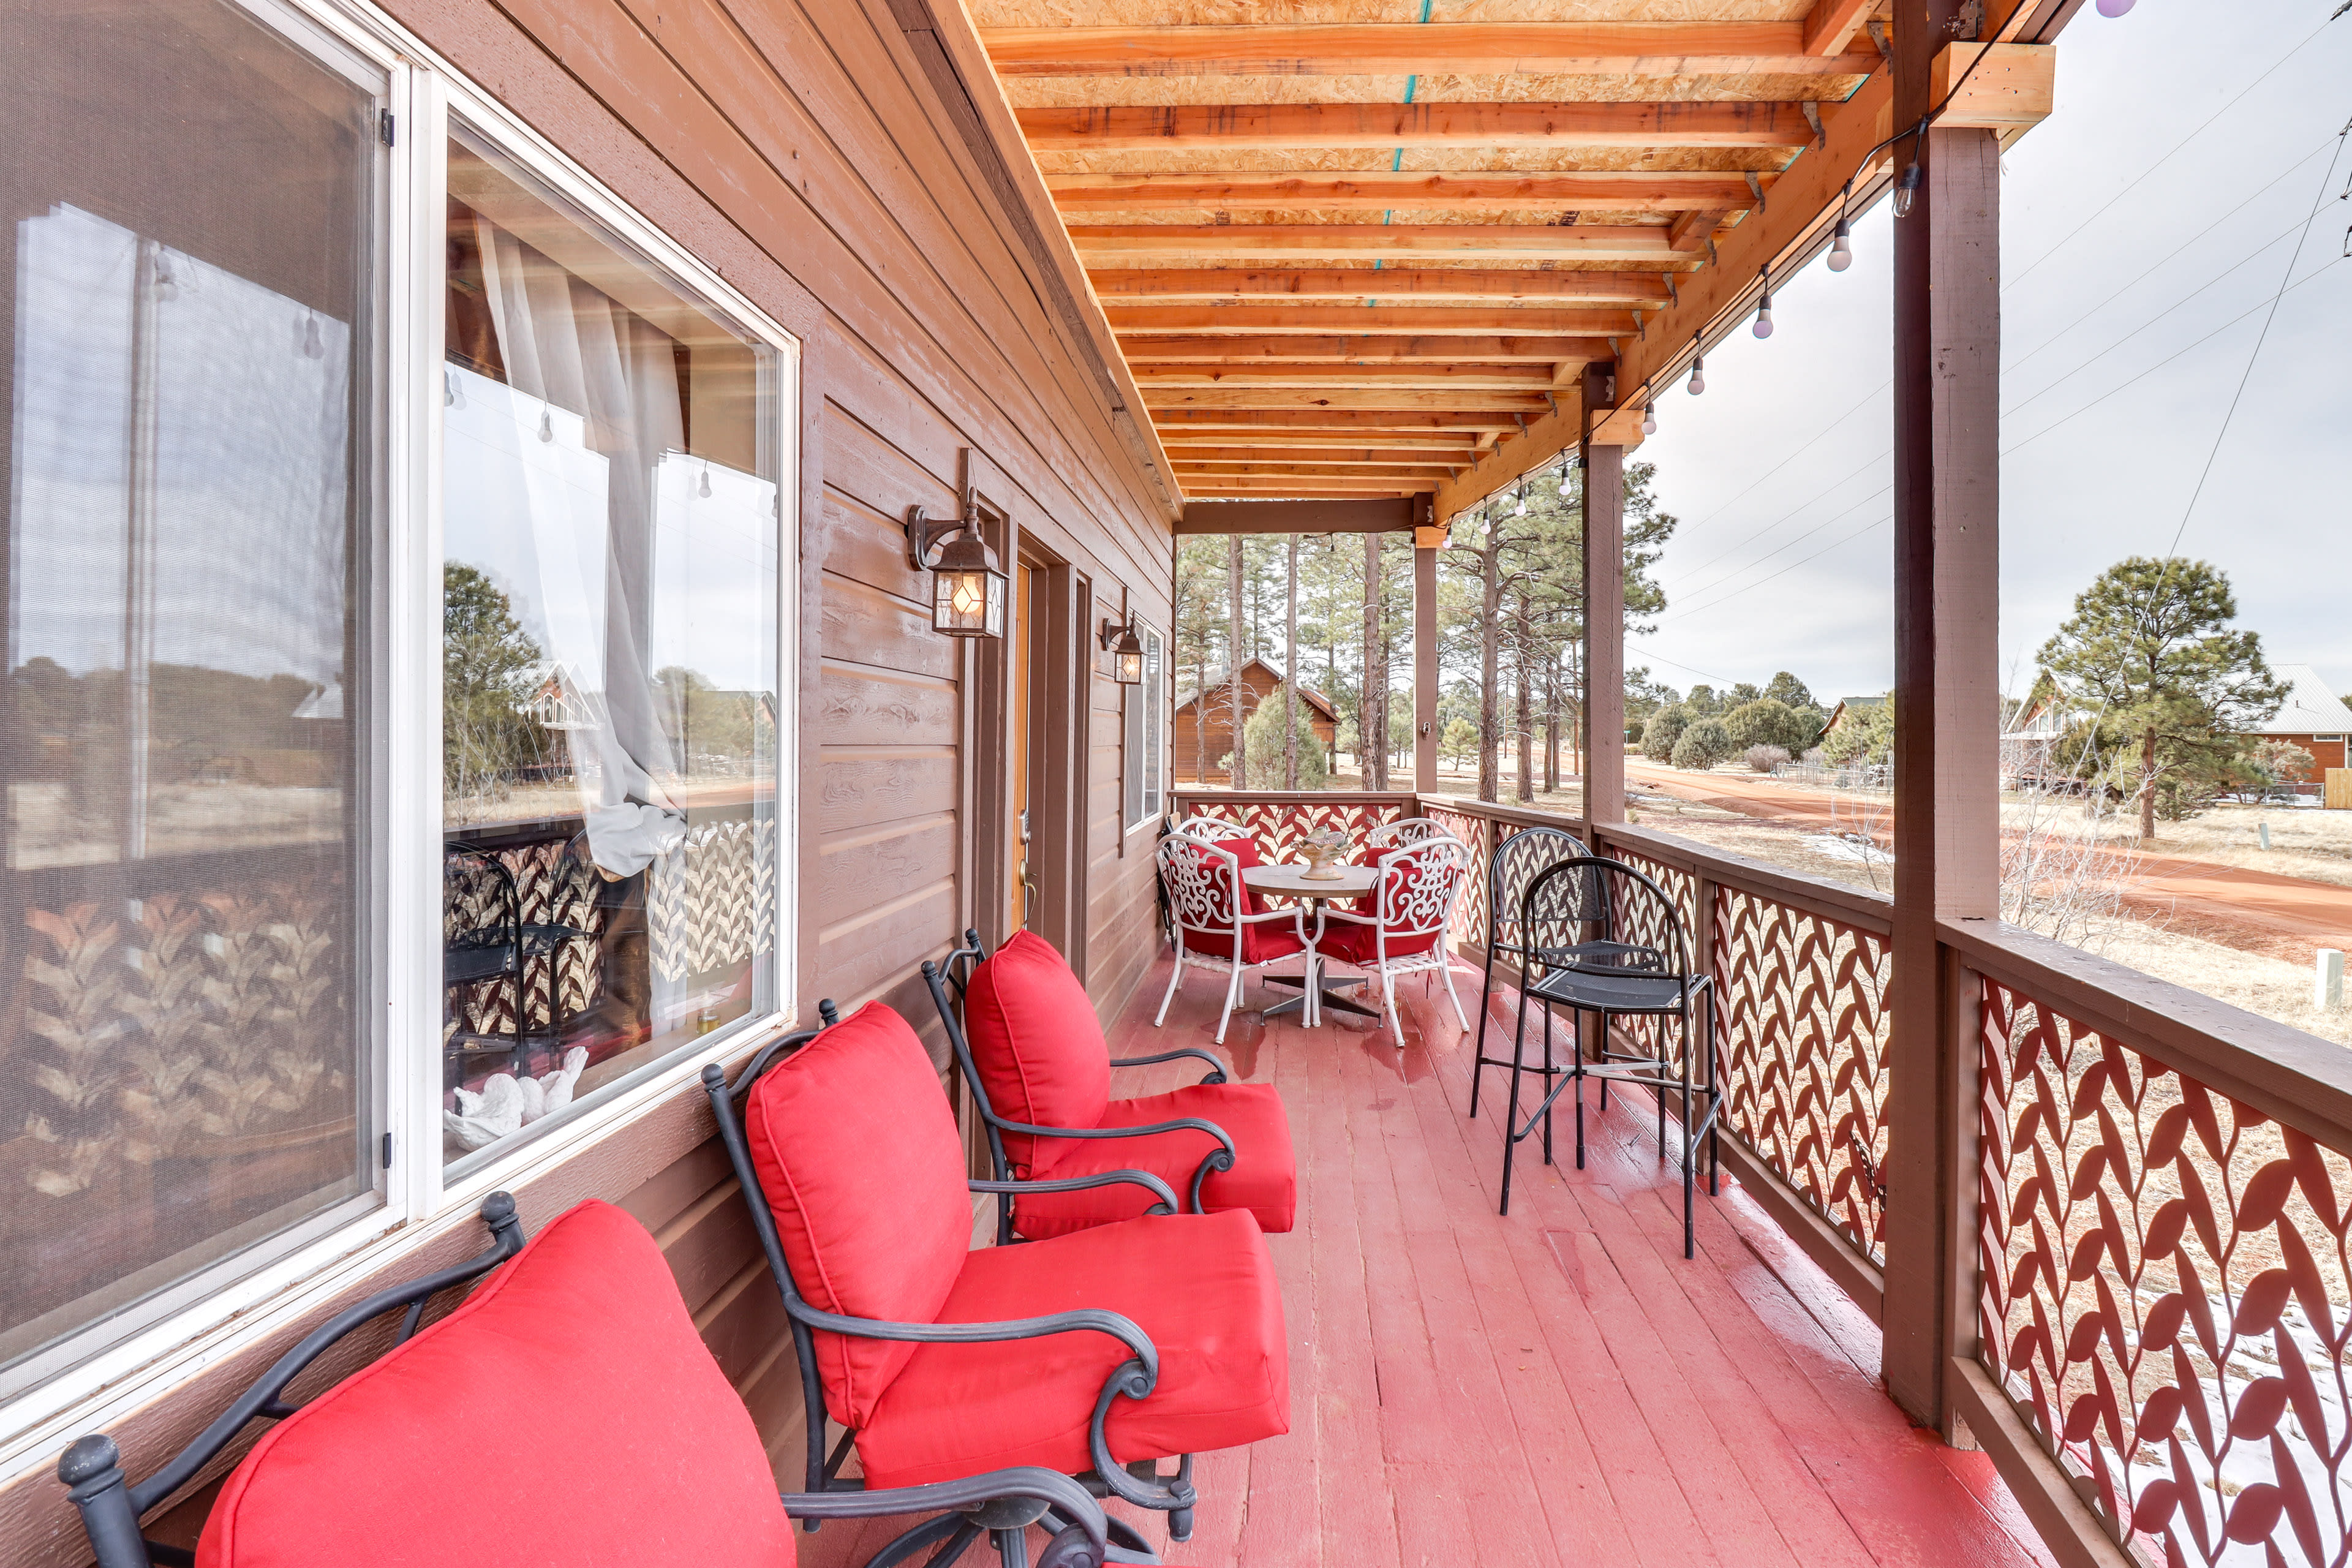 Heber Vacation Rental | 4BR | 2BA | 2,160 Sq Ft | Step-Free Entry